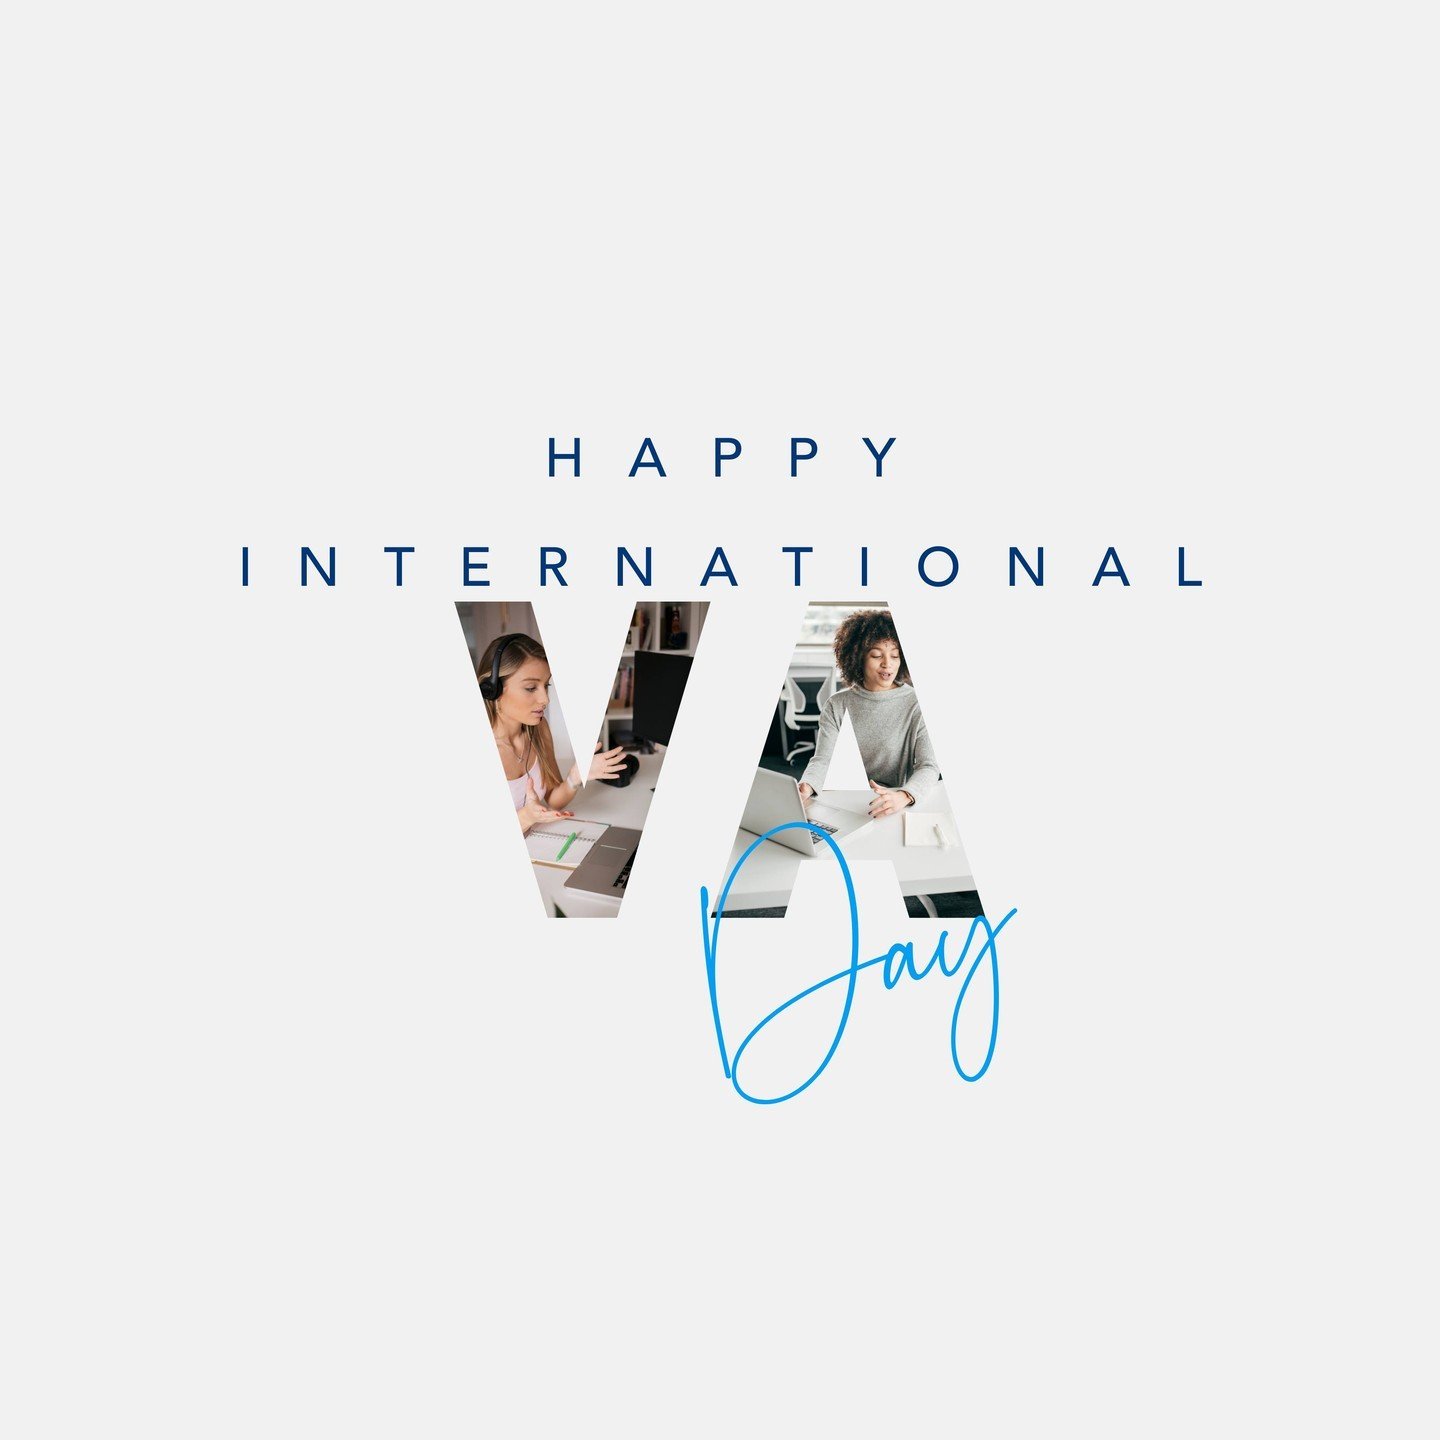 🎉 Happy International Virtual Assistants Day! 🎉⁠
⁠
Today, we're celebrating virtual assistants! ⁠
⁠
On this special day, we extend our heartfelt thanks to our incredible team for their unwavering commitment and exceptional service to both Simplify,